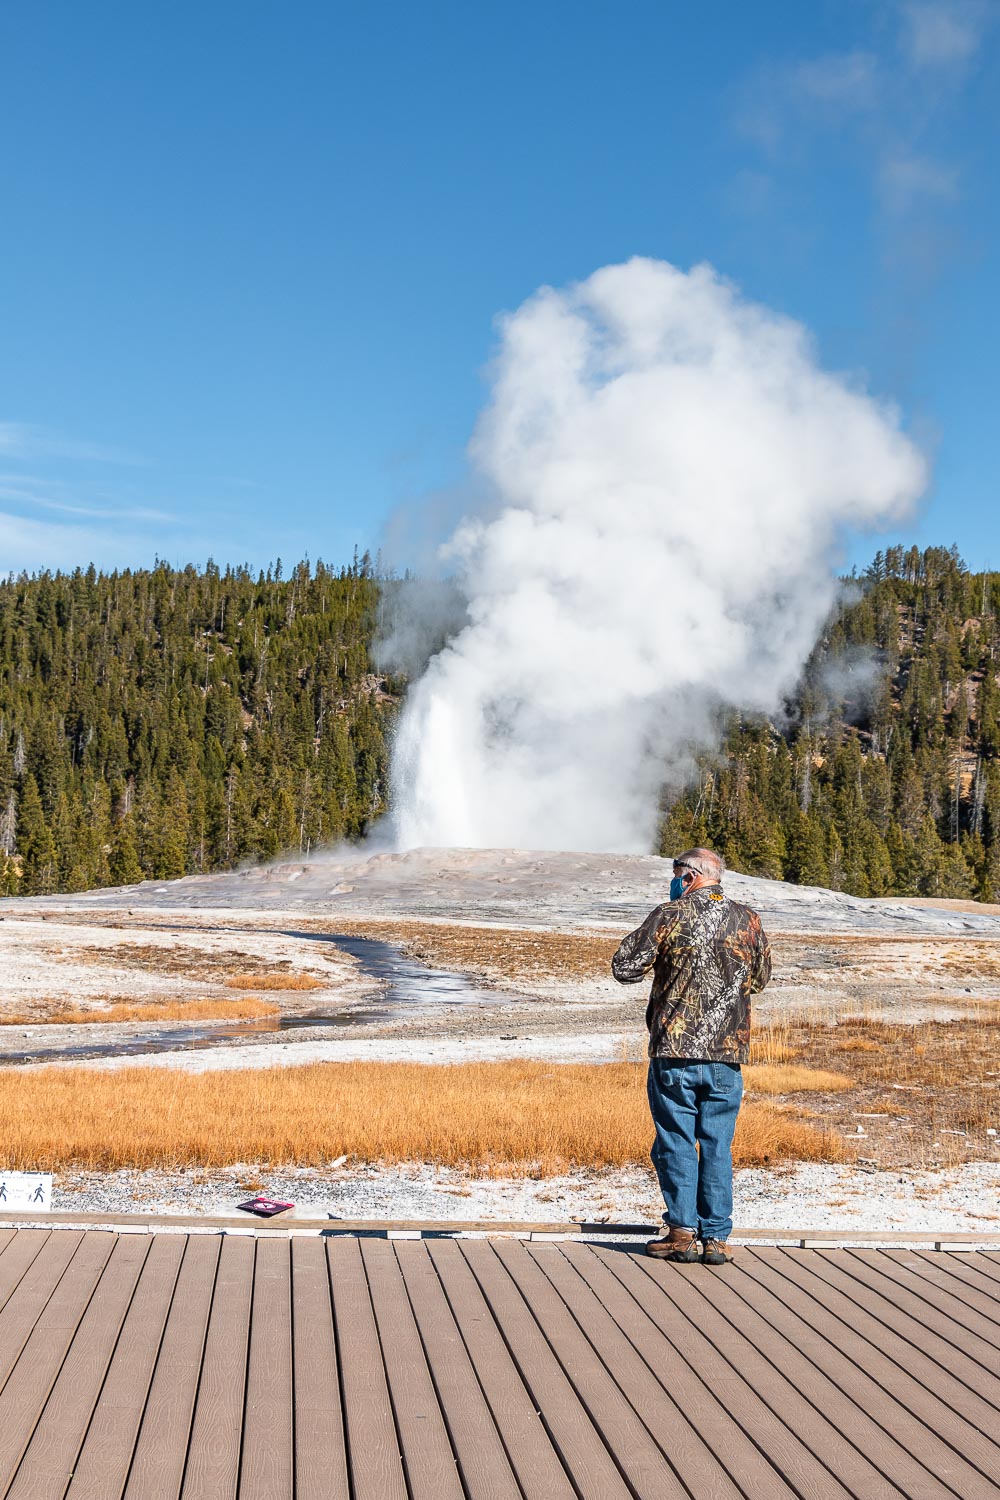 First visit to Yellowstone - Roads and Destinations. - roadsanddestinations.com